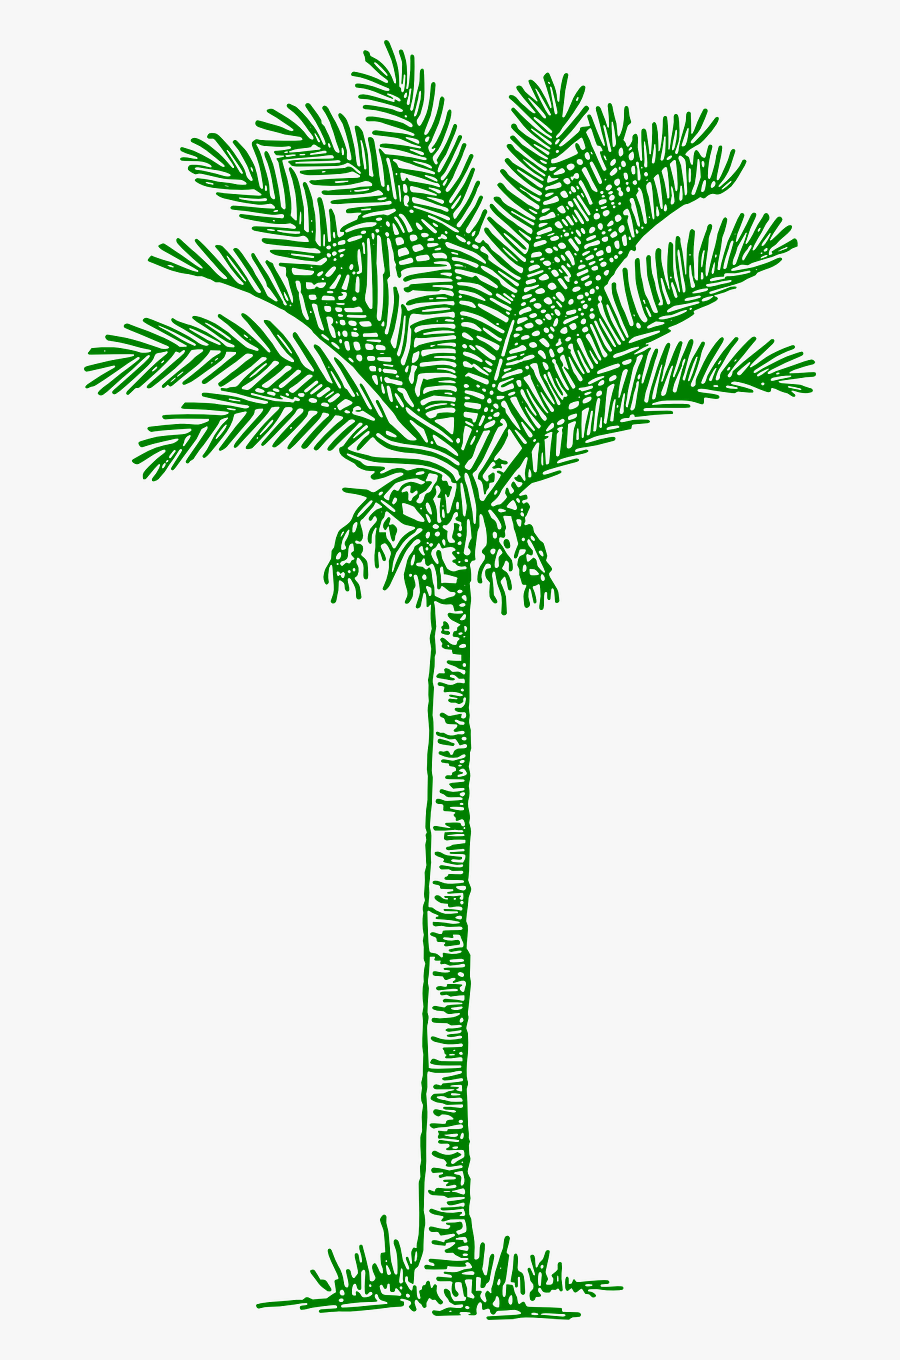 Palmtree Leaves Beach Tropical Png Image - Date Palm Tree Drawing, Transparent Clipart